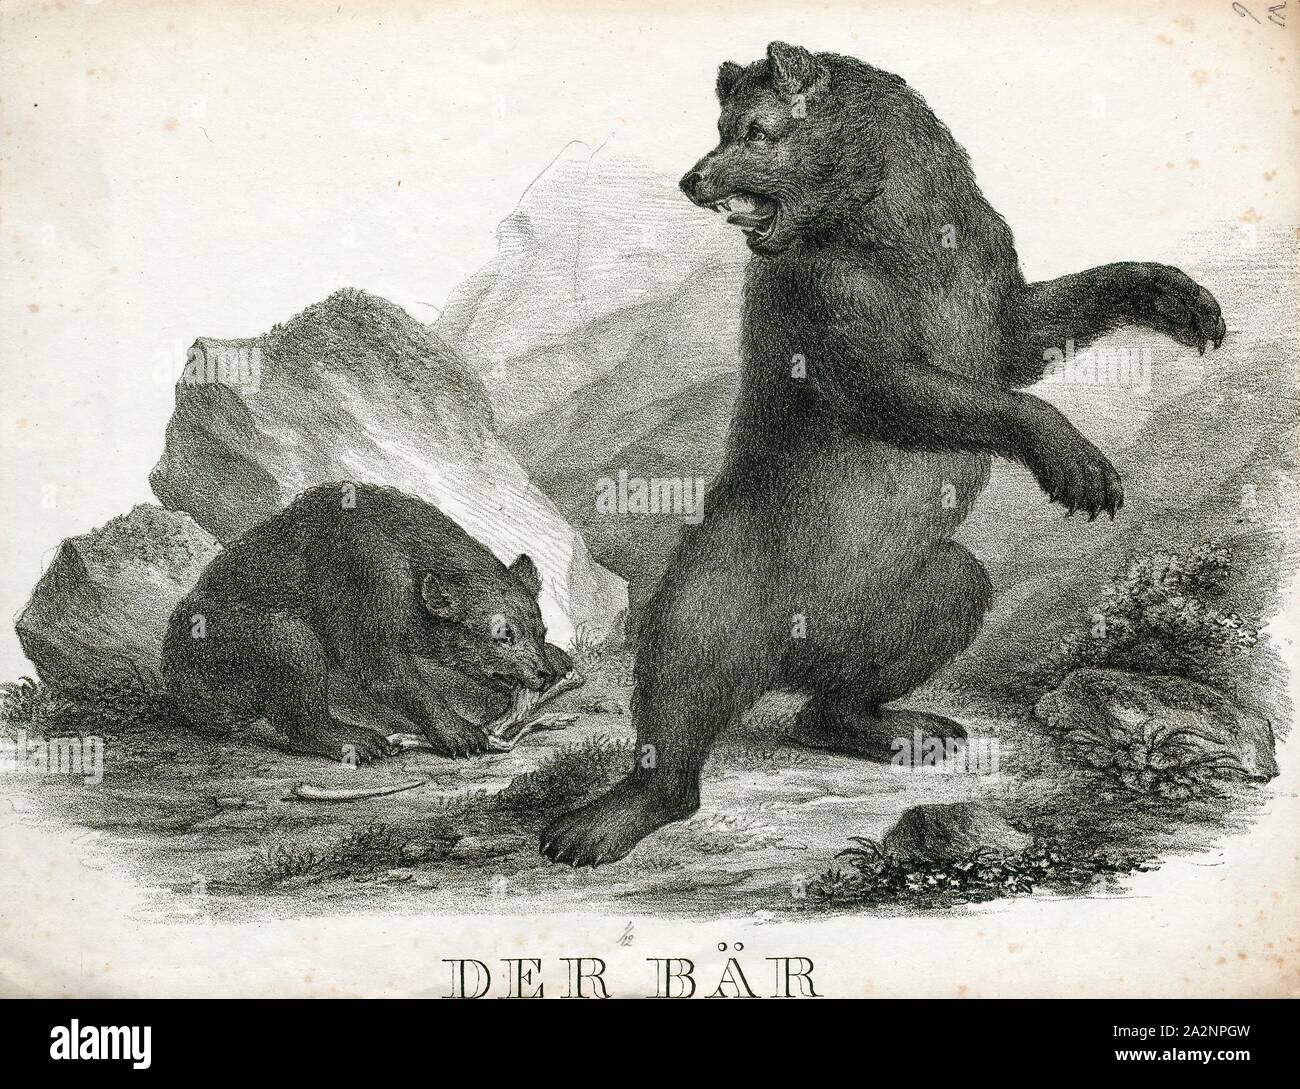 Ursus arctos, Print, The brown bear (Ursus arctos) is a bear that is found across much of northern Eurasia and North America. In North America, the populations of brown bears are often called grizzly bears. It is one of the largest living terrestrial members of the order Carnivora, rivaled in size only by its closest relative, the polar bear (Ursus maritimus), which is much less variable in size and slightly larger on average., 1700-1880 Stock Photo